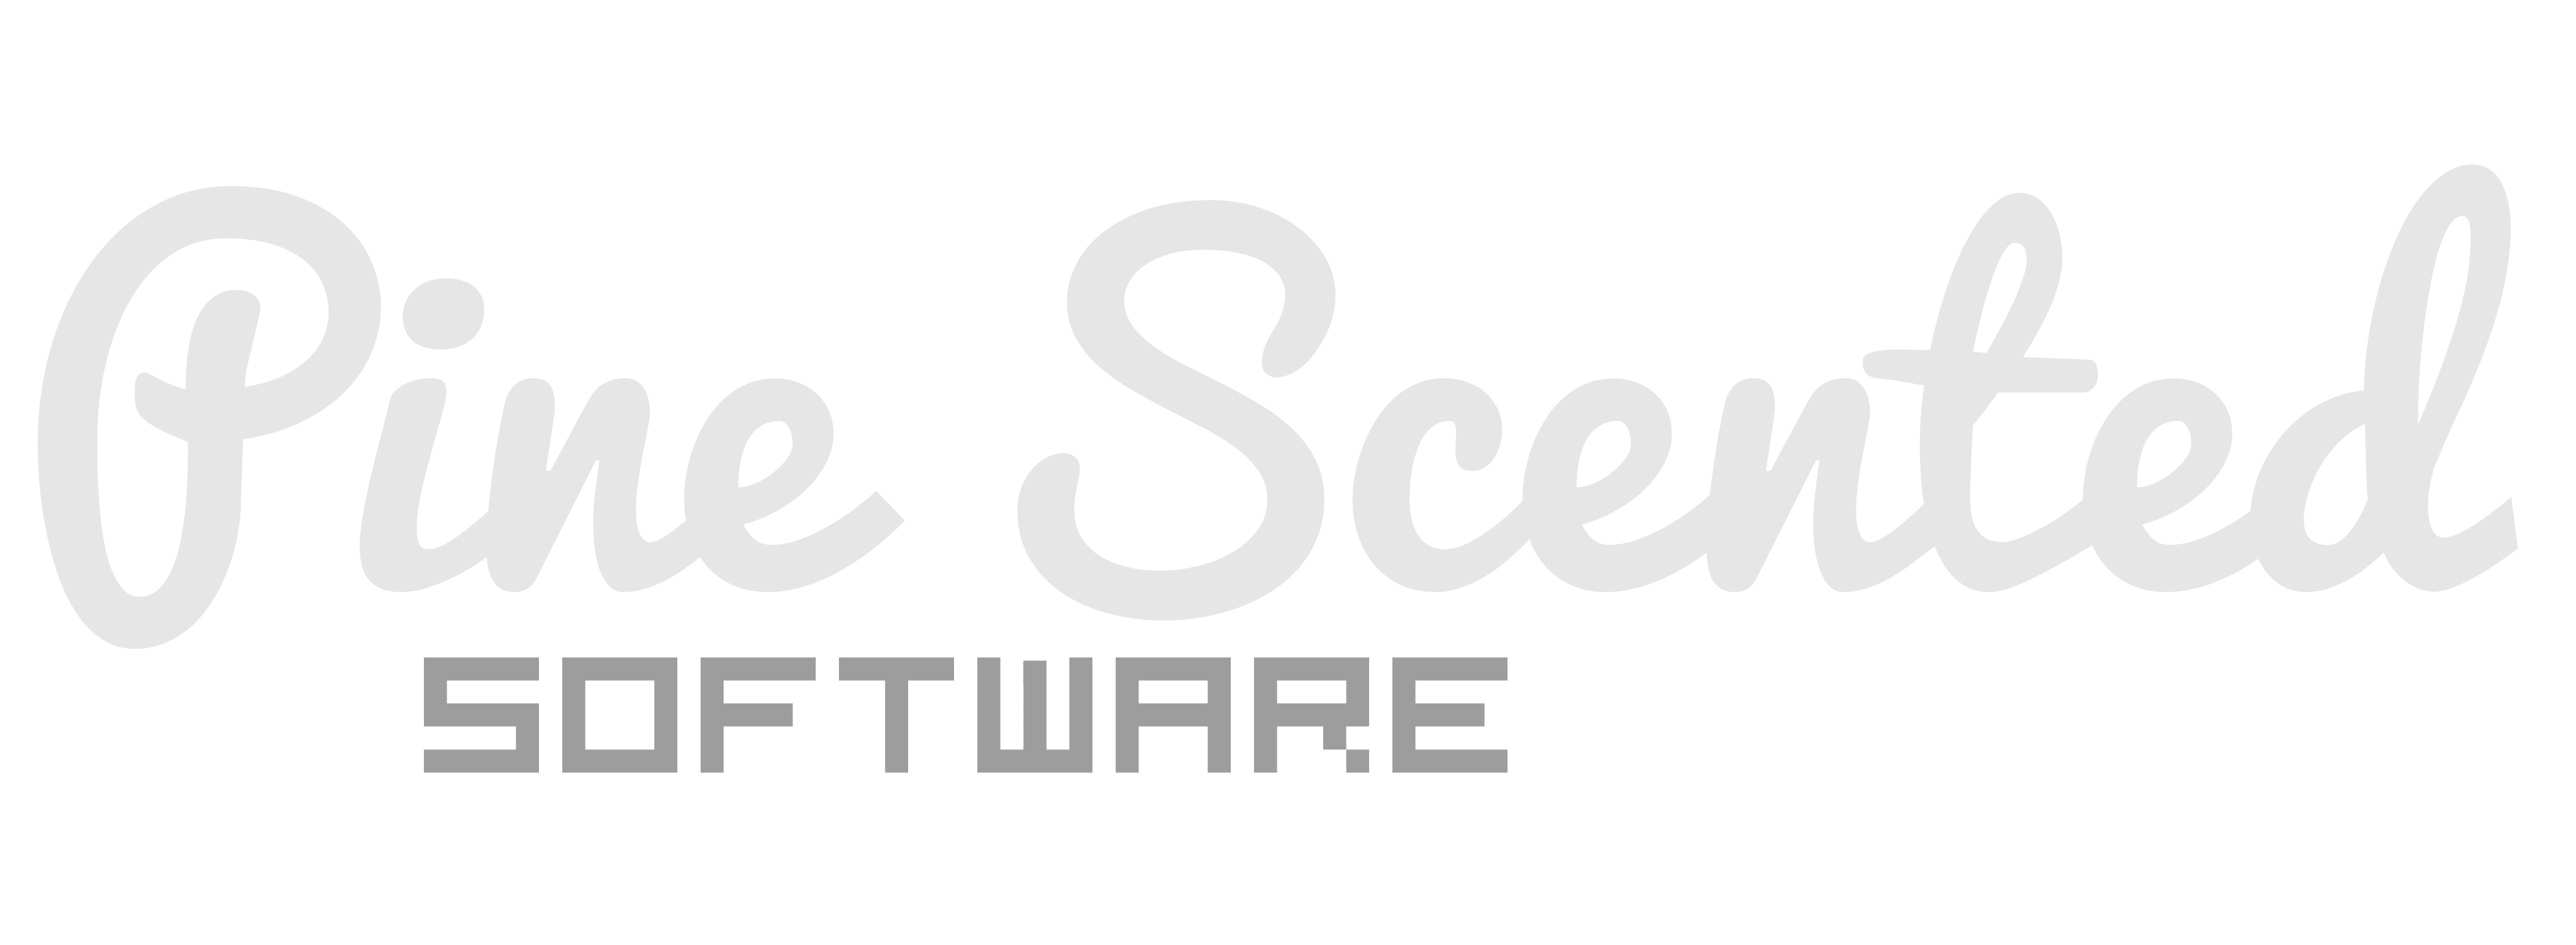 Pine Scented Software